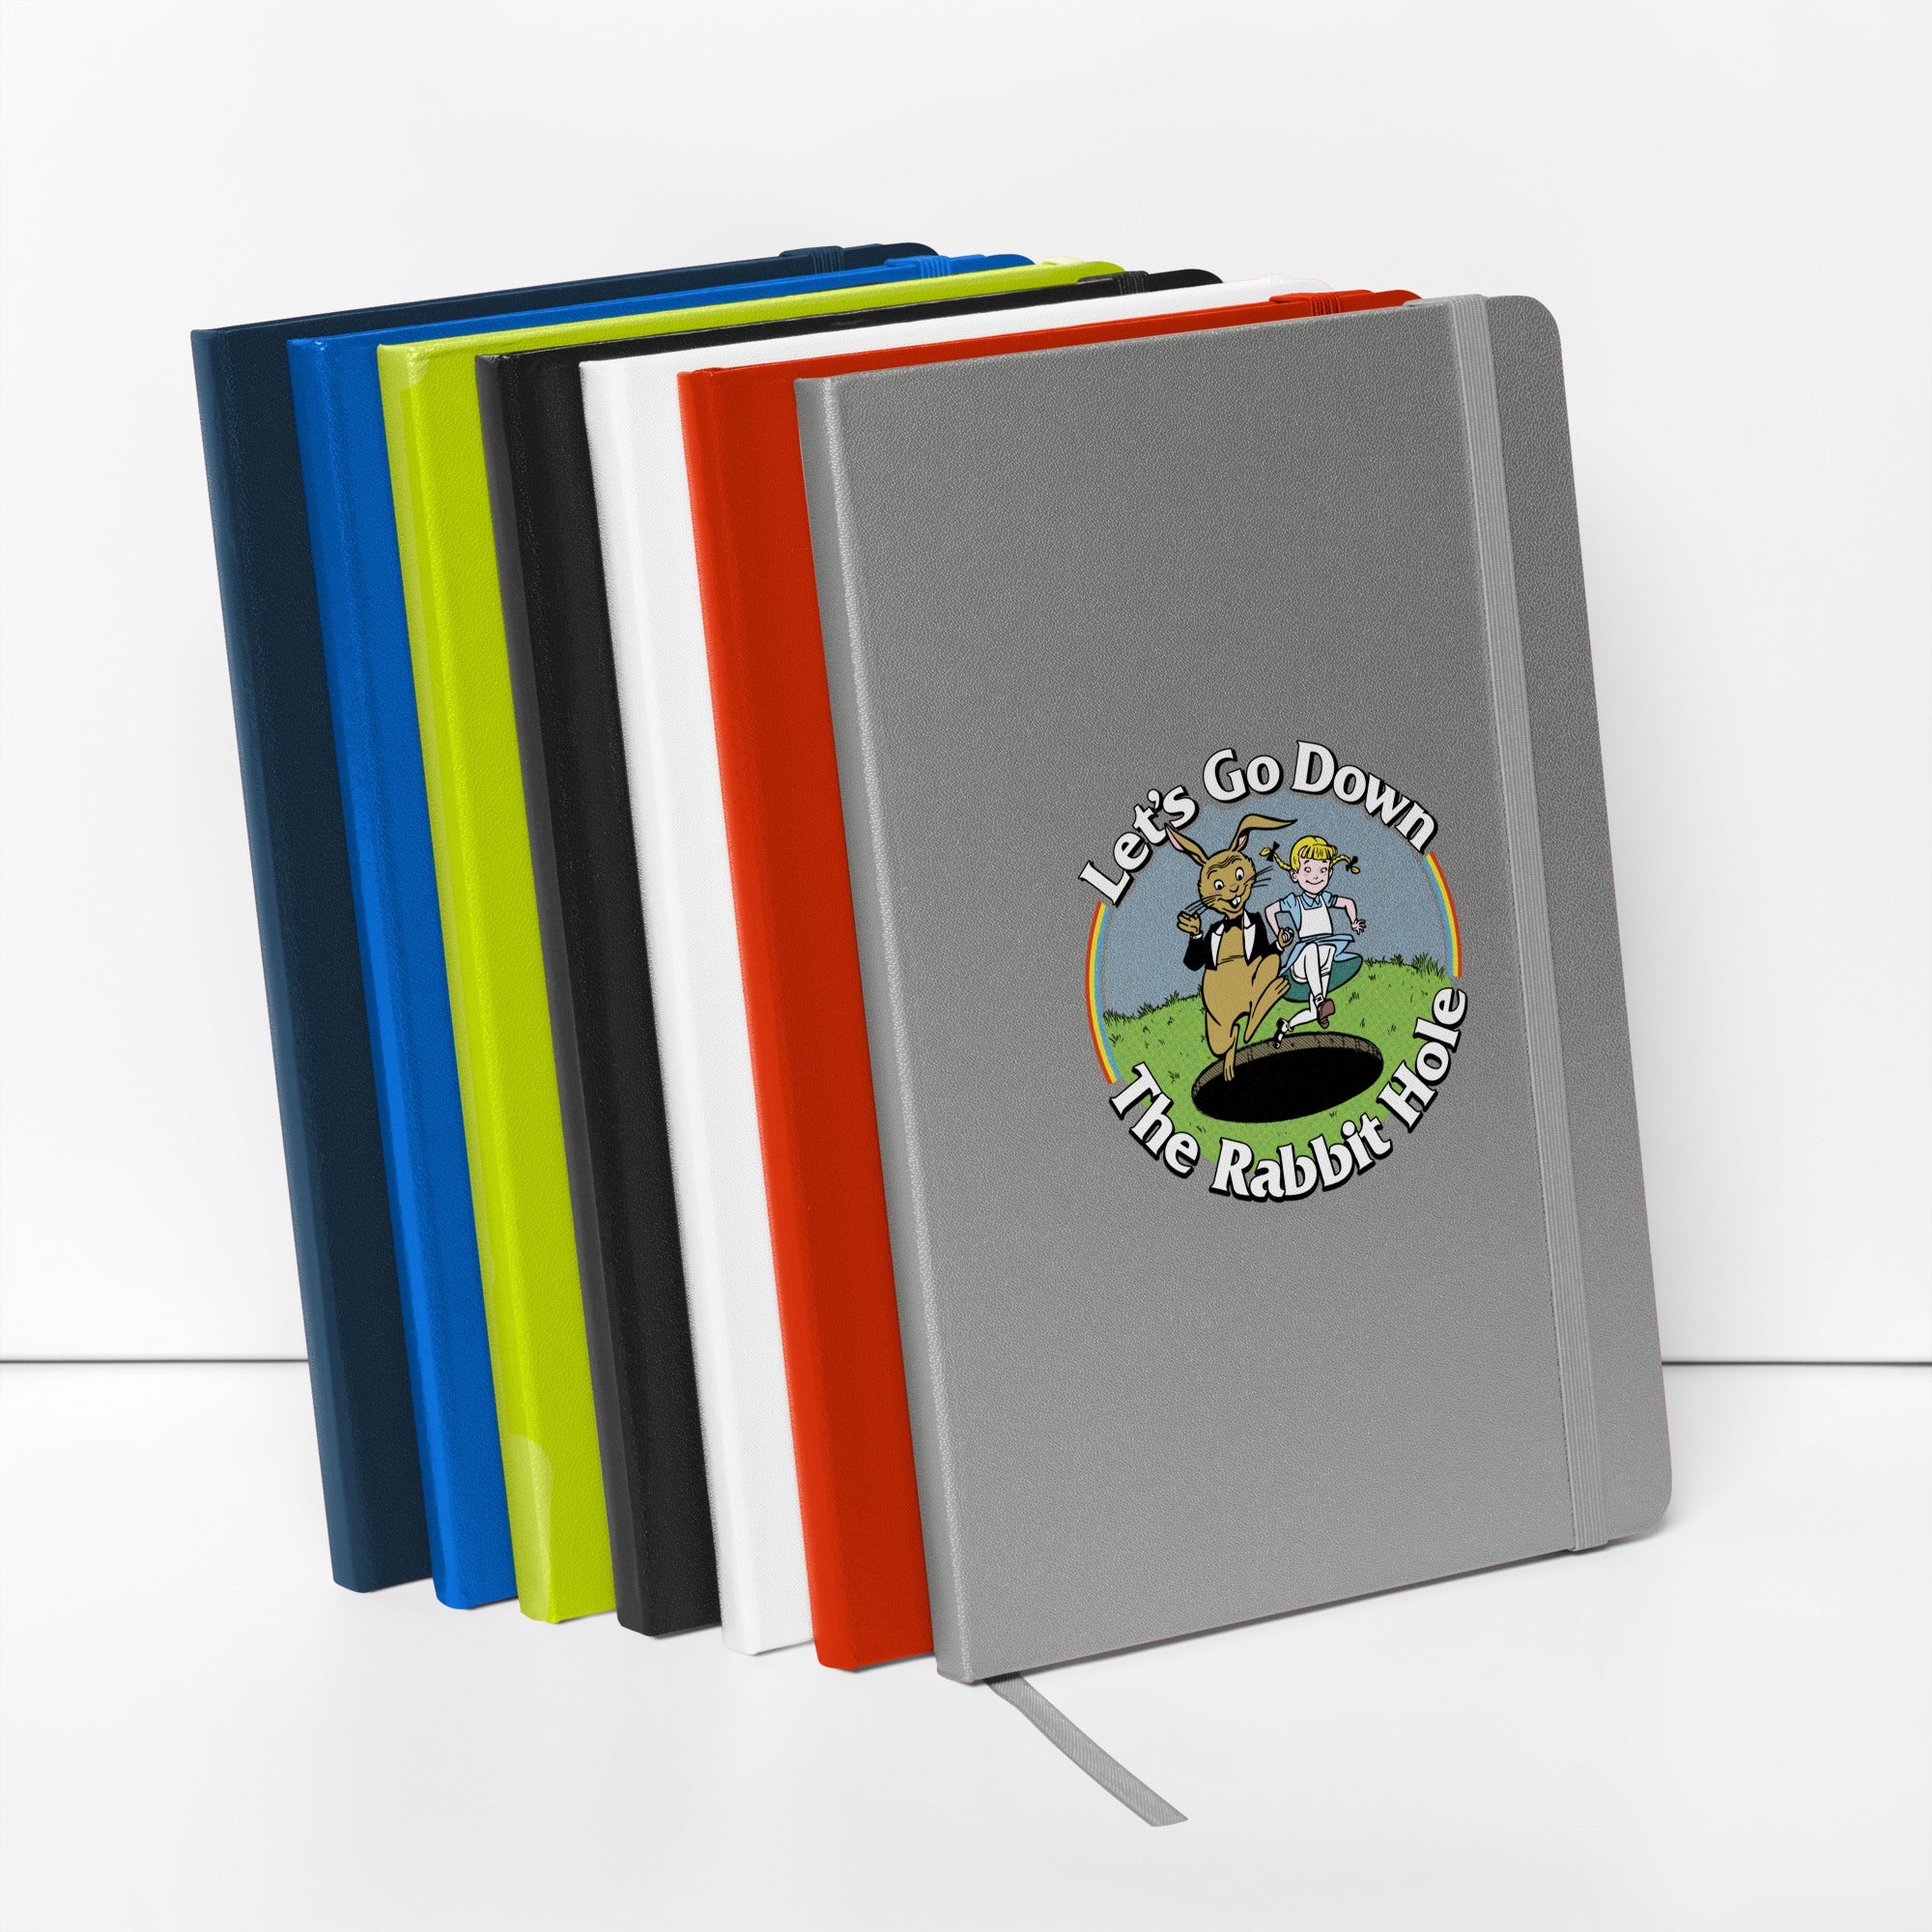 Let's Go Down the Rabbit Hole Hardcover Bound Notebook